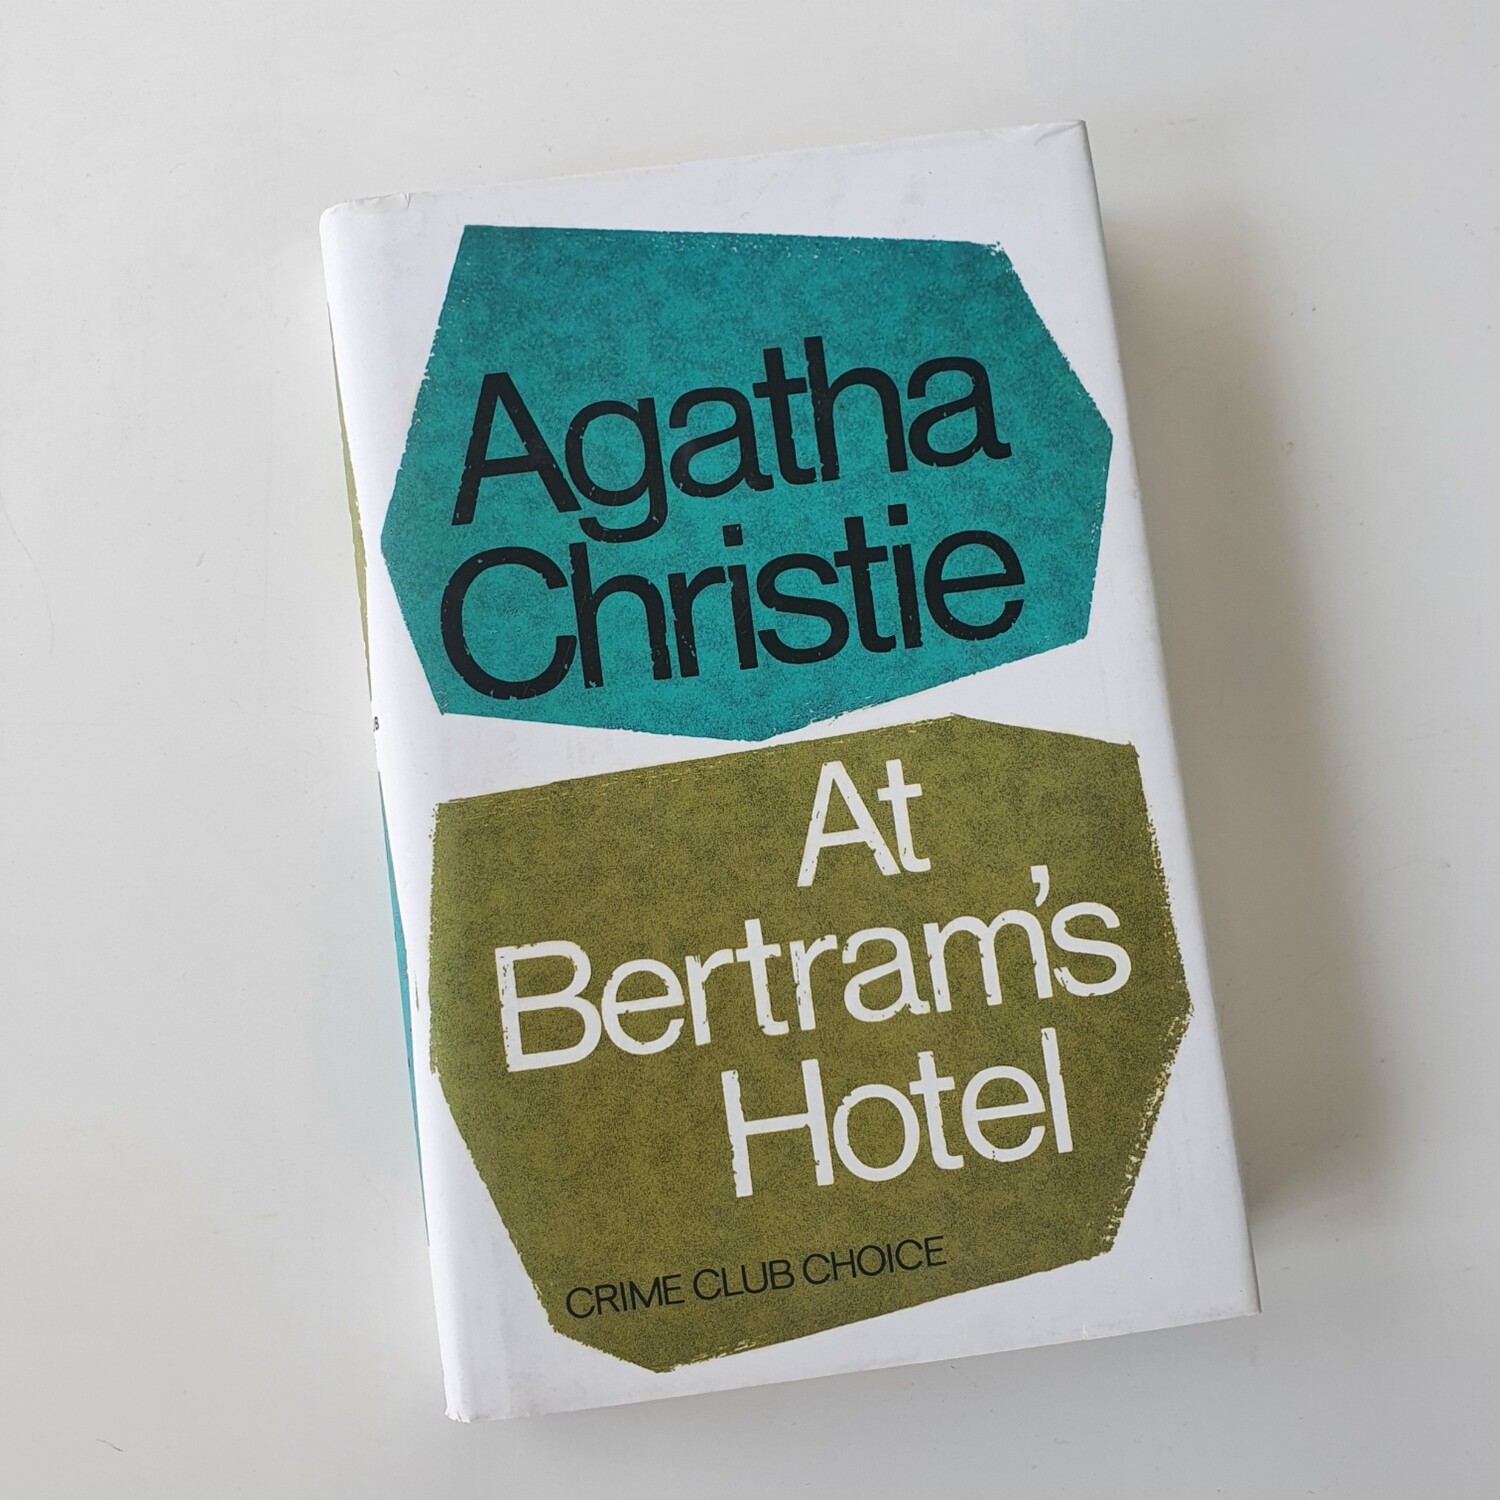 Agatha Christie - At Bertram's Hotel Notebook - made from a dust jacket